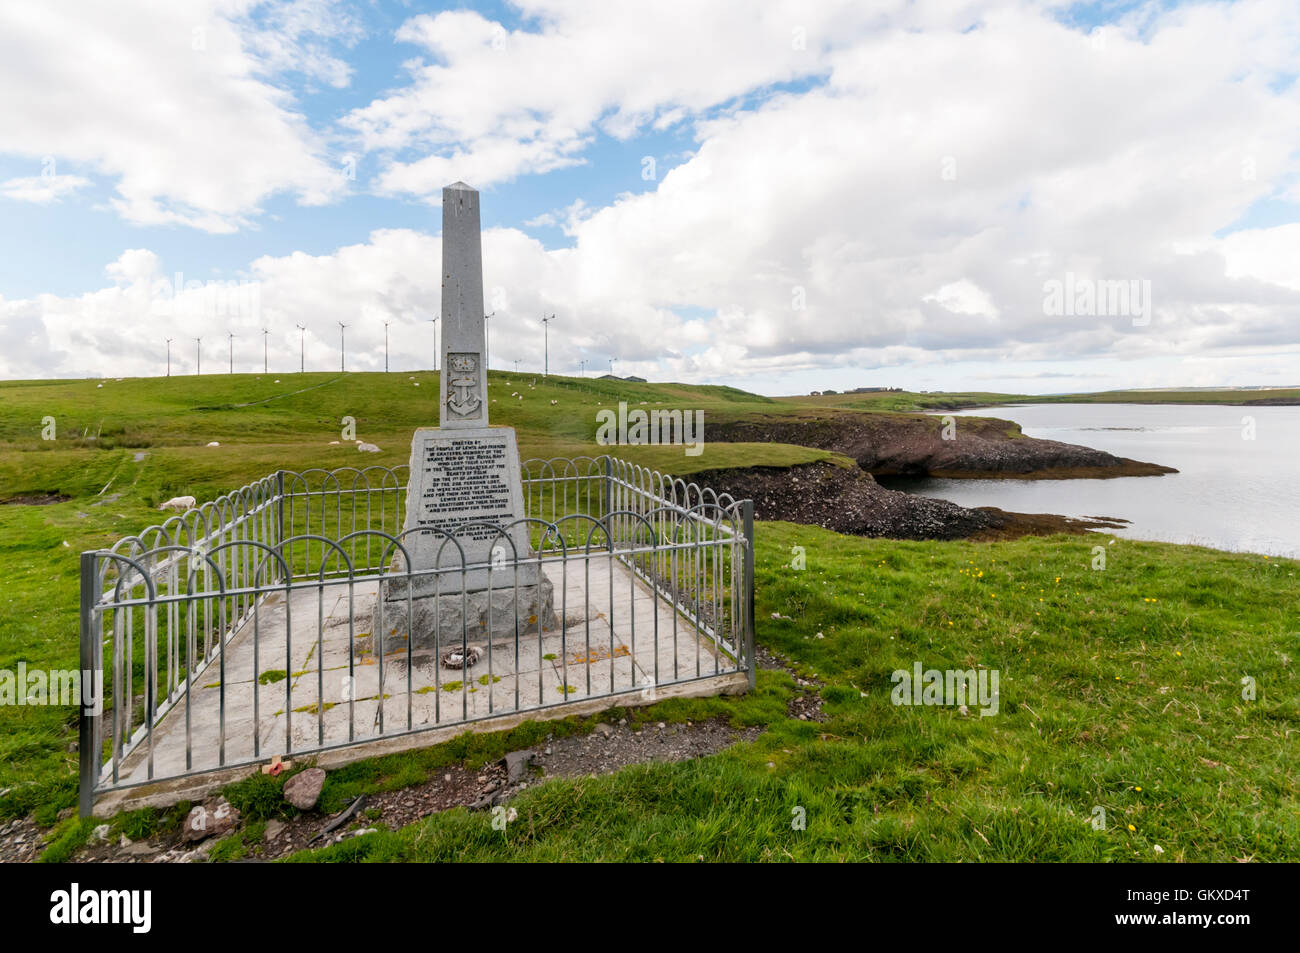 Memorial to the yacht HMY Iolaire which sank in 1919 after hitting the Beasts of Holm on the Isle of Lewis. SEE DETAILS IN DESC. Stock Photo